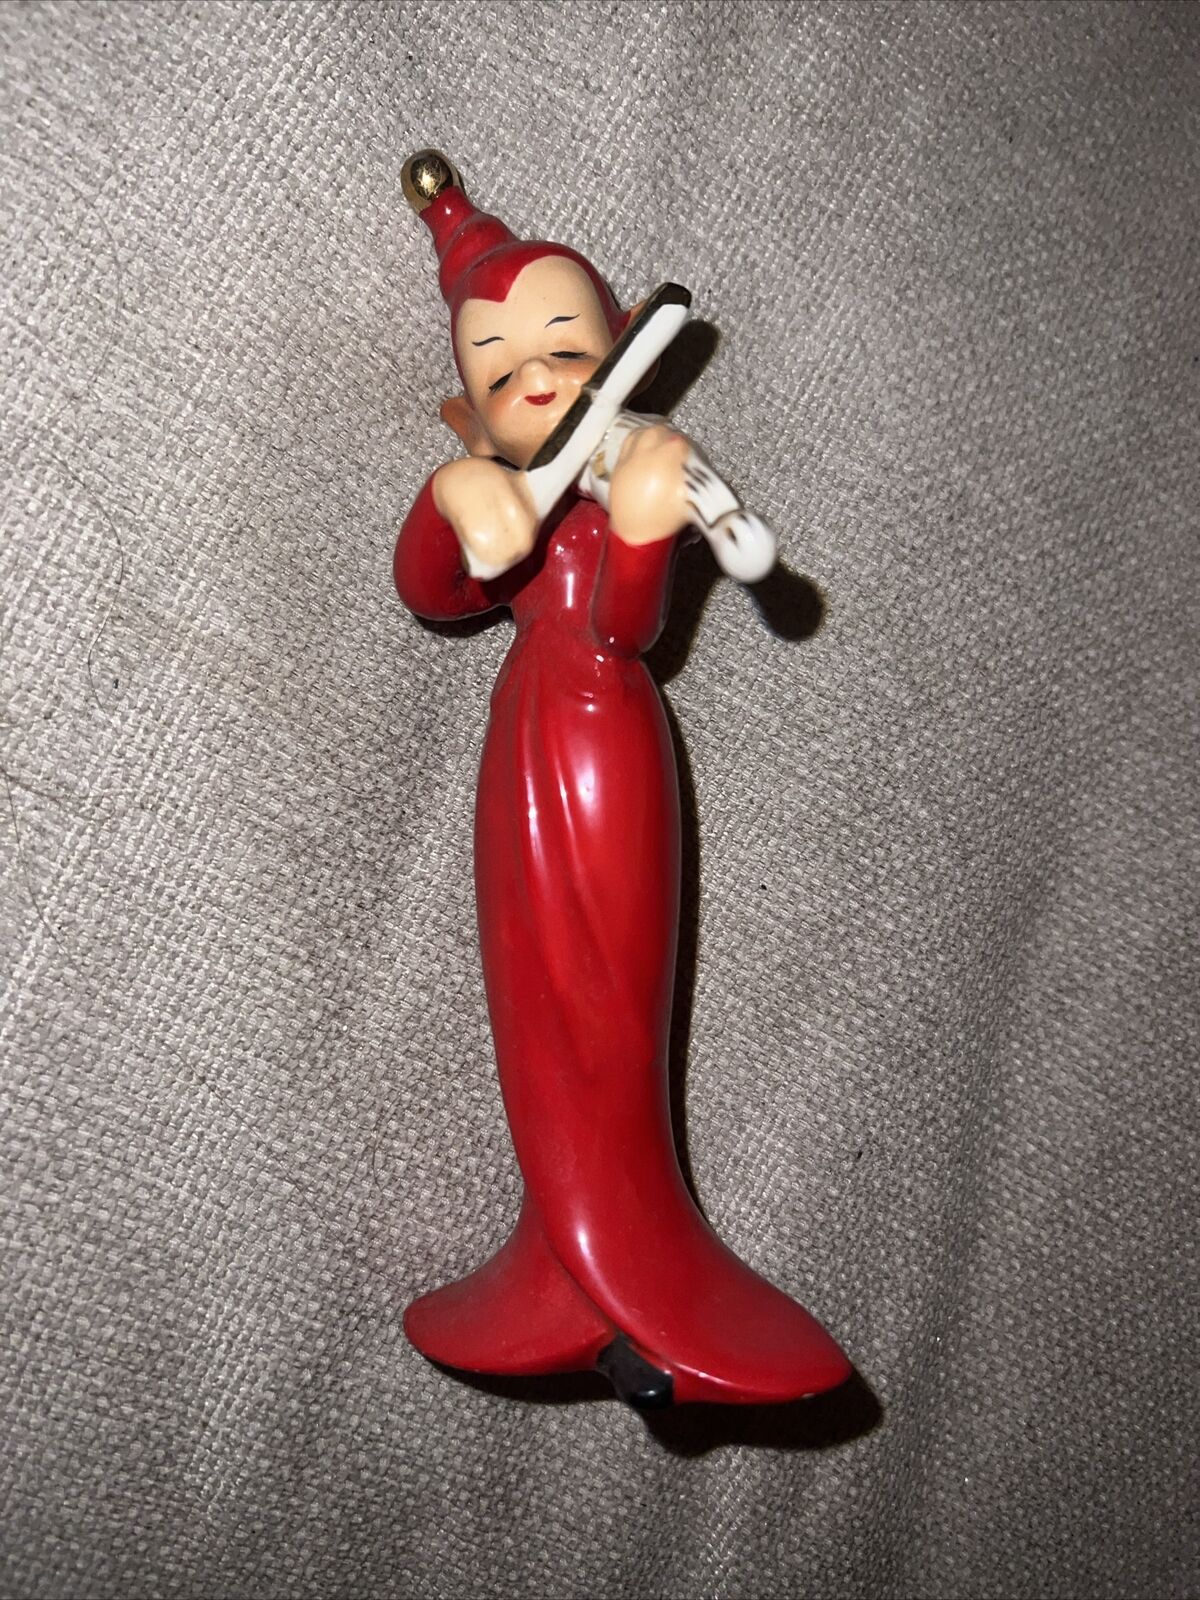 RARE Vintage BRINNS NORCREST Red Pixie Elf Playing Violin  Made in Japan 6”